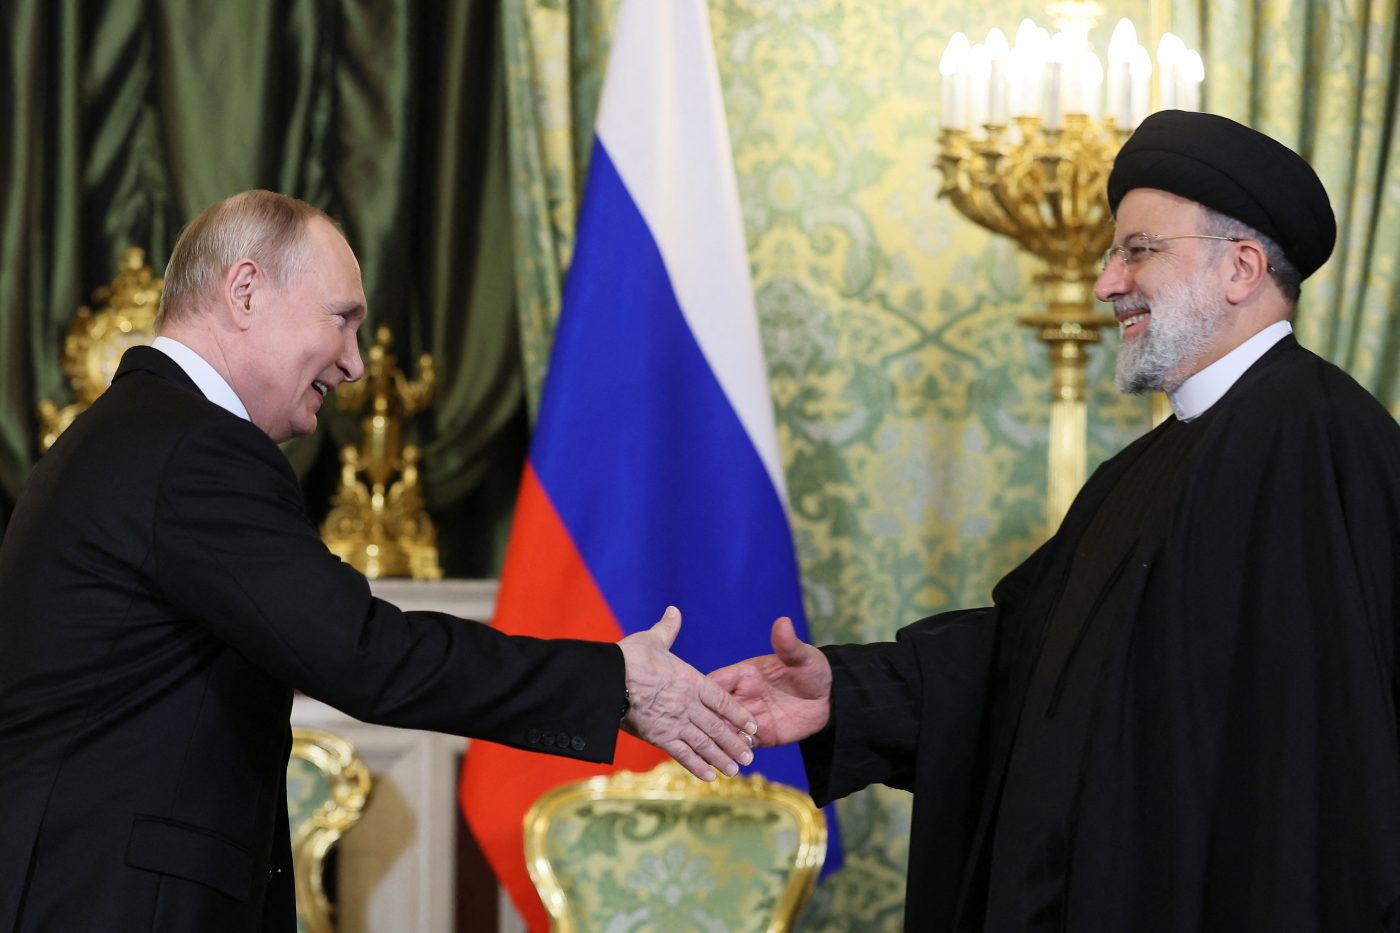 Photo: Russian President Vladimir Putin shakes hands with Iranian President Ebrahim Raisi during a meeting in Moscow, Russia December 7, 2023. Credit: Sputnik/Sergei Bobylev/Pool via REUTERS